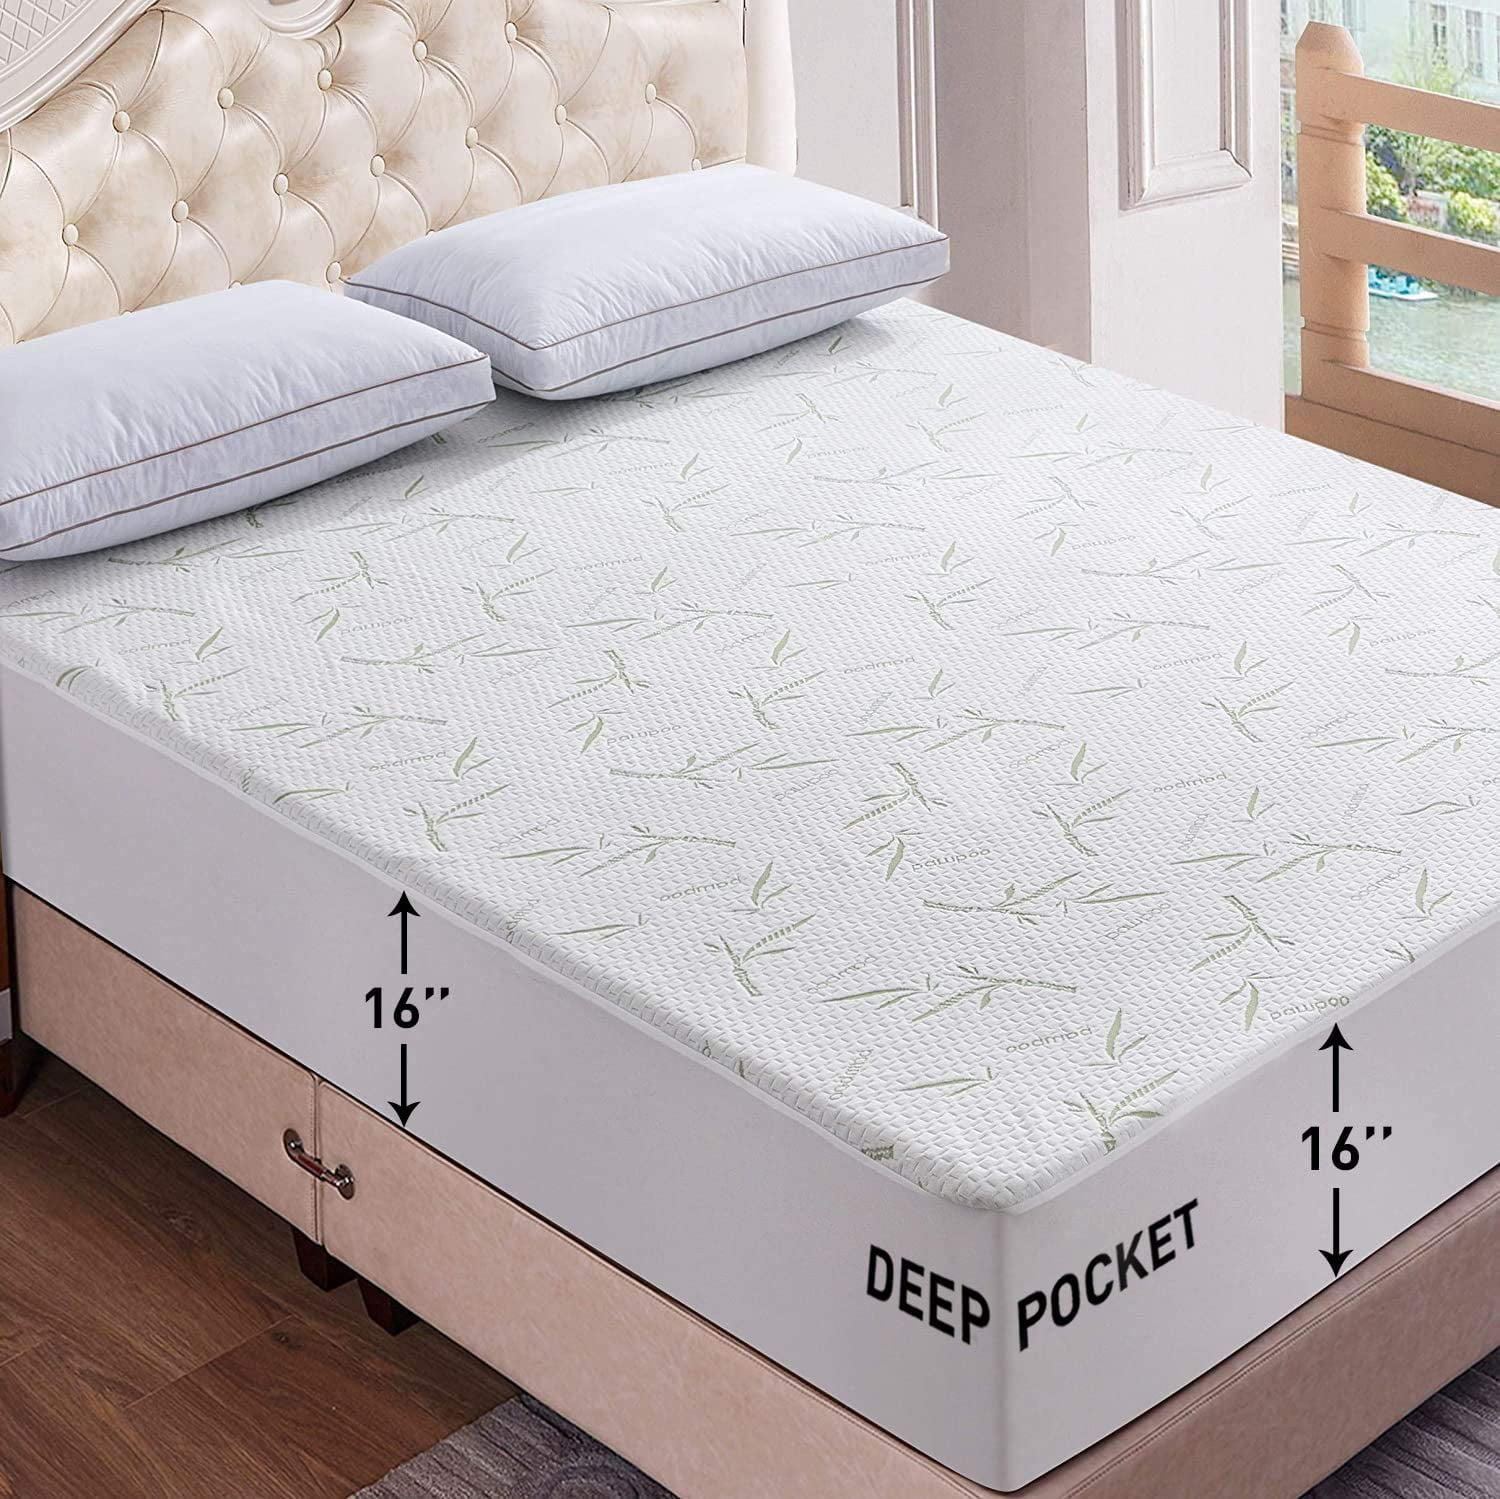 Details about   Bamboo Waterproof Mattress Protector Air Fabric Cooling Noiseless Fitted Cover 